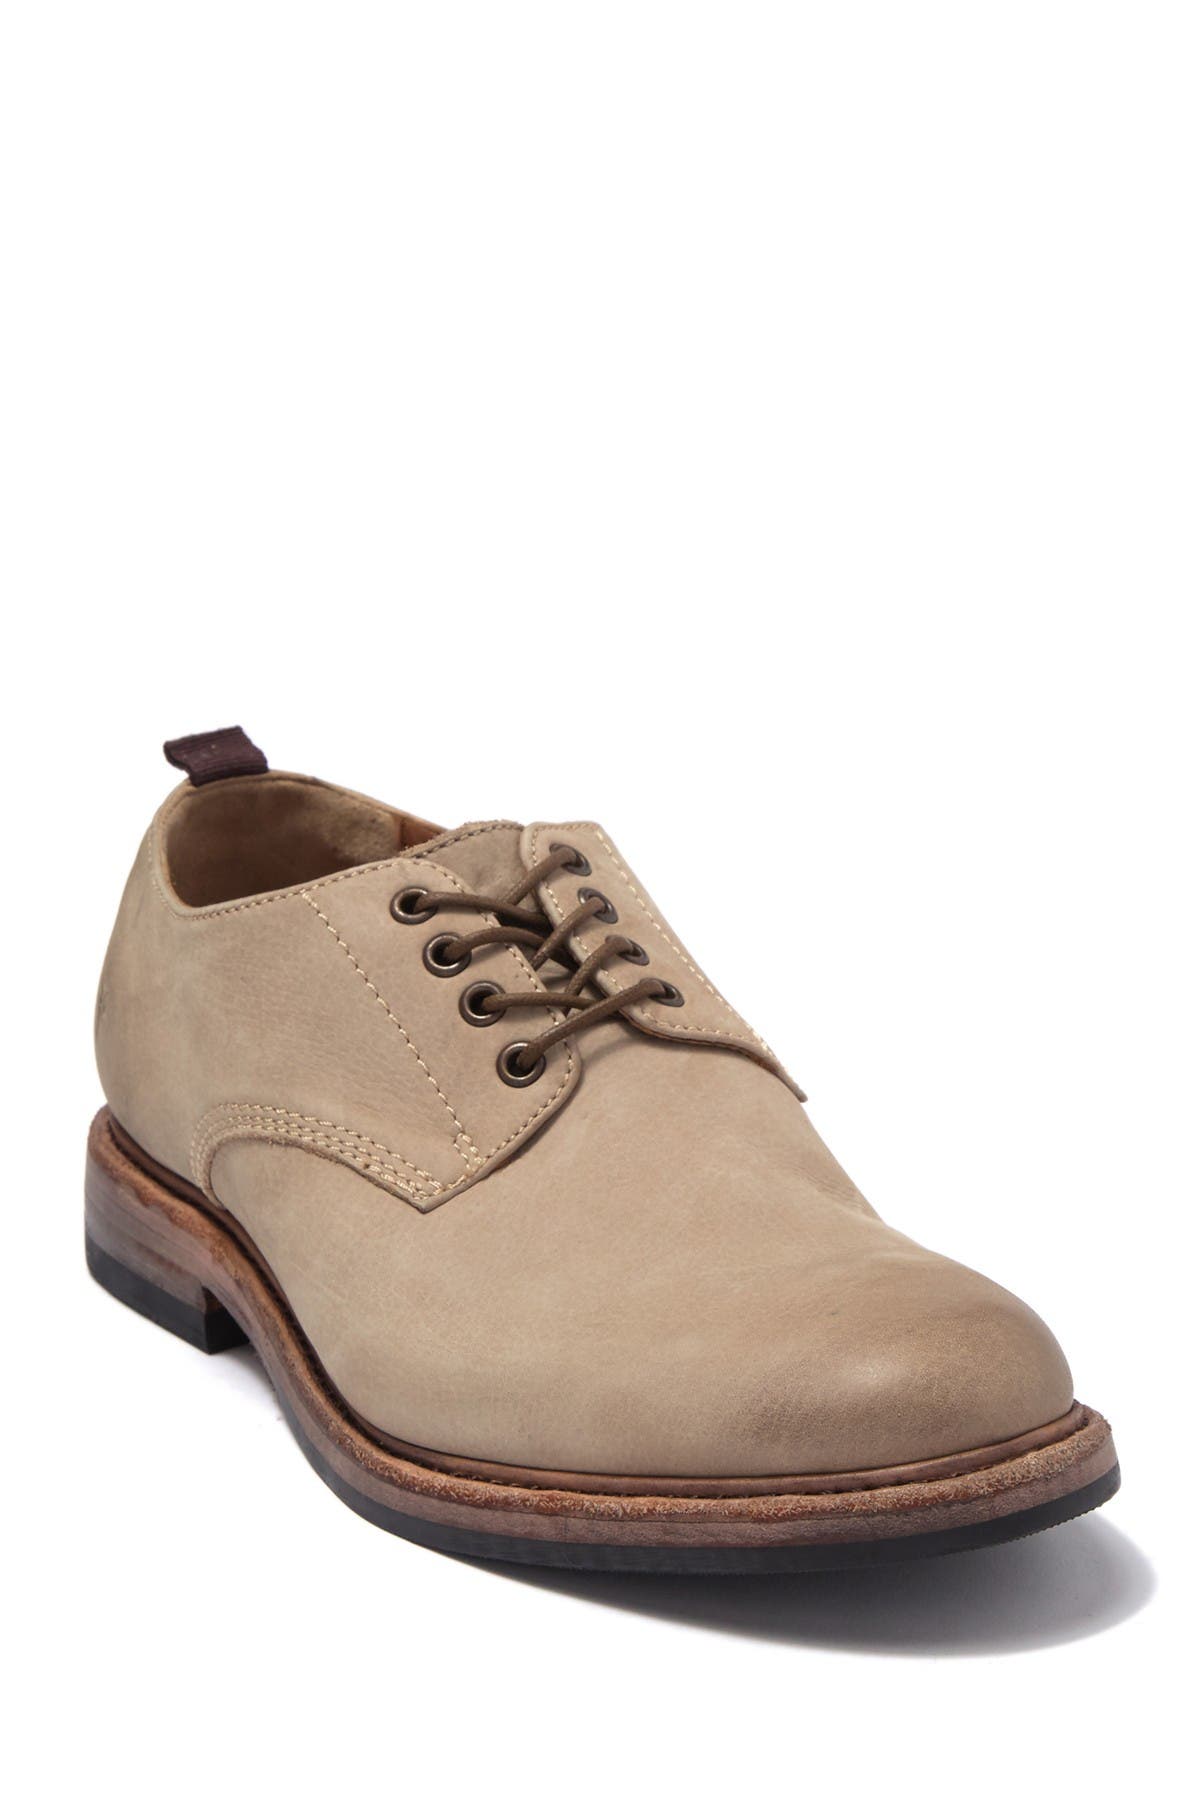 Frye | Murray Leather Oxford 